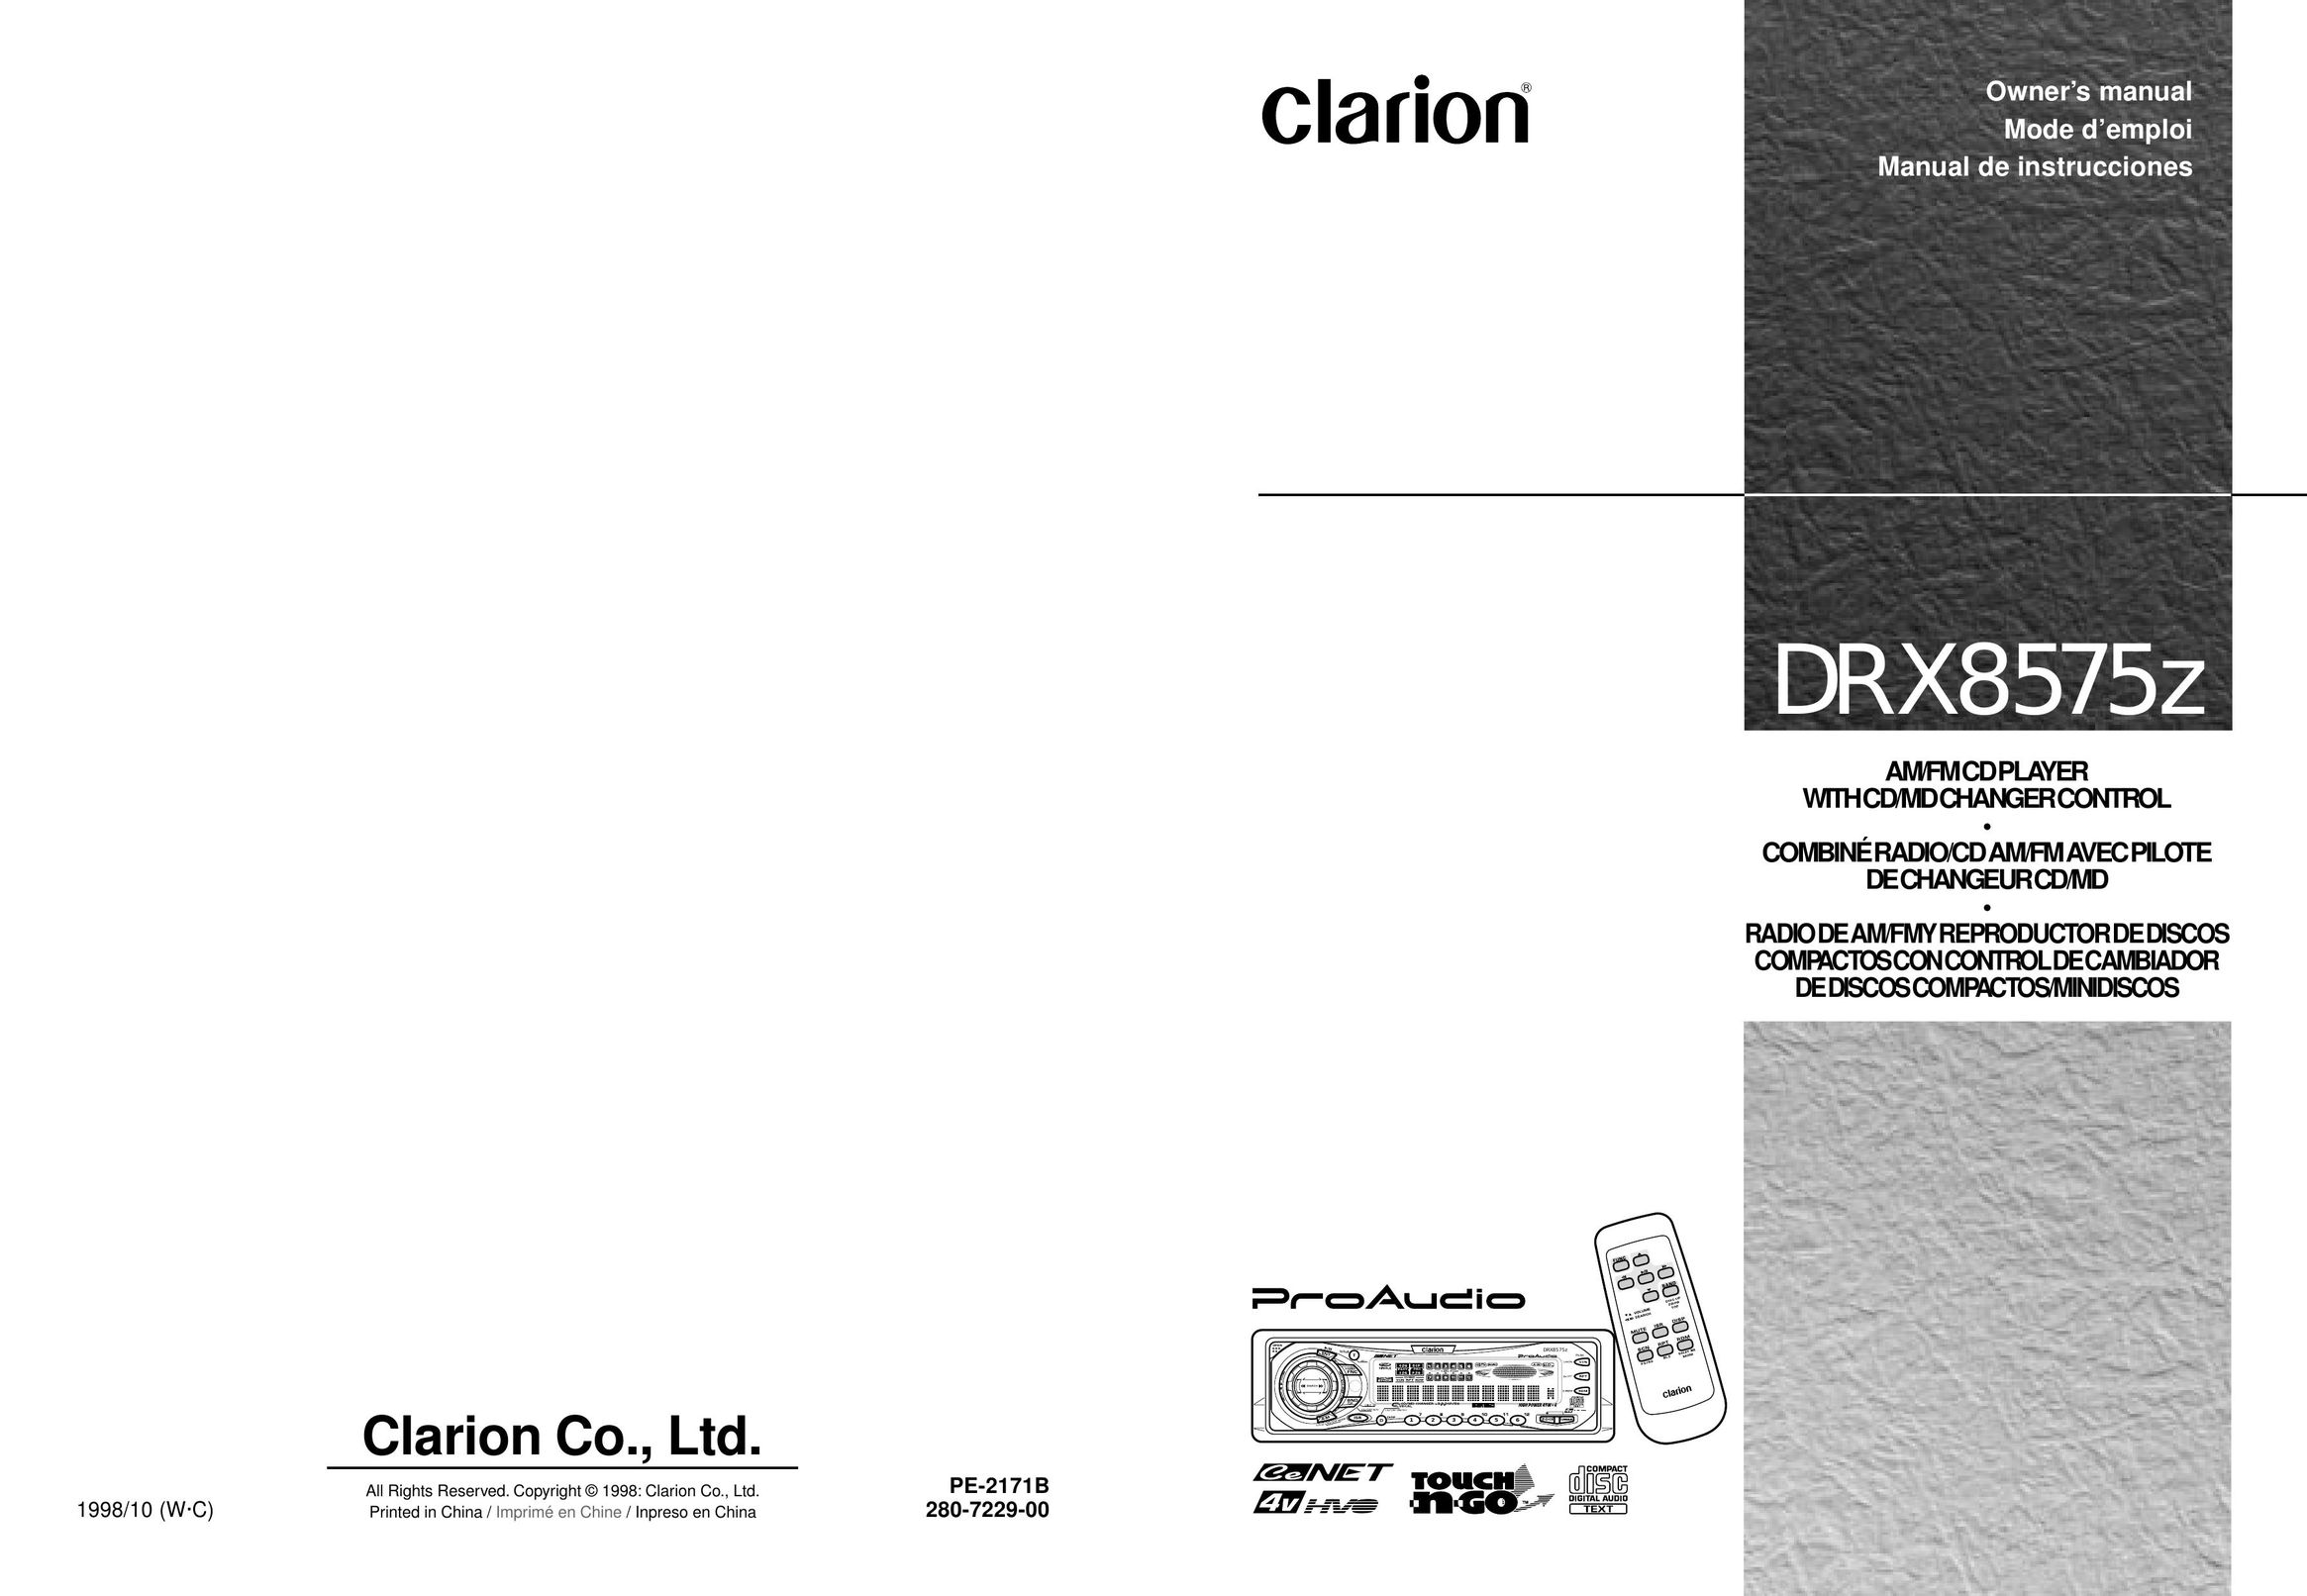 Clarion DRX8575z CD Player User Manual